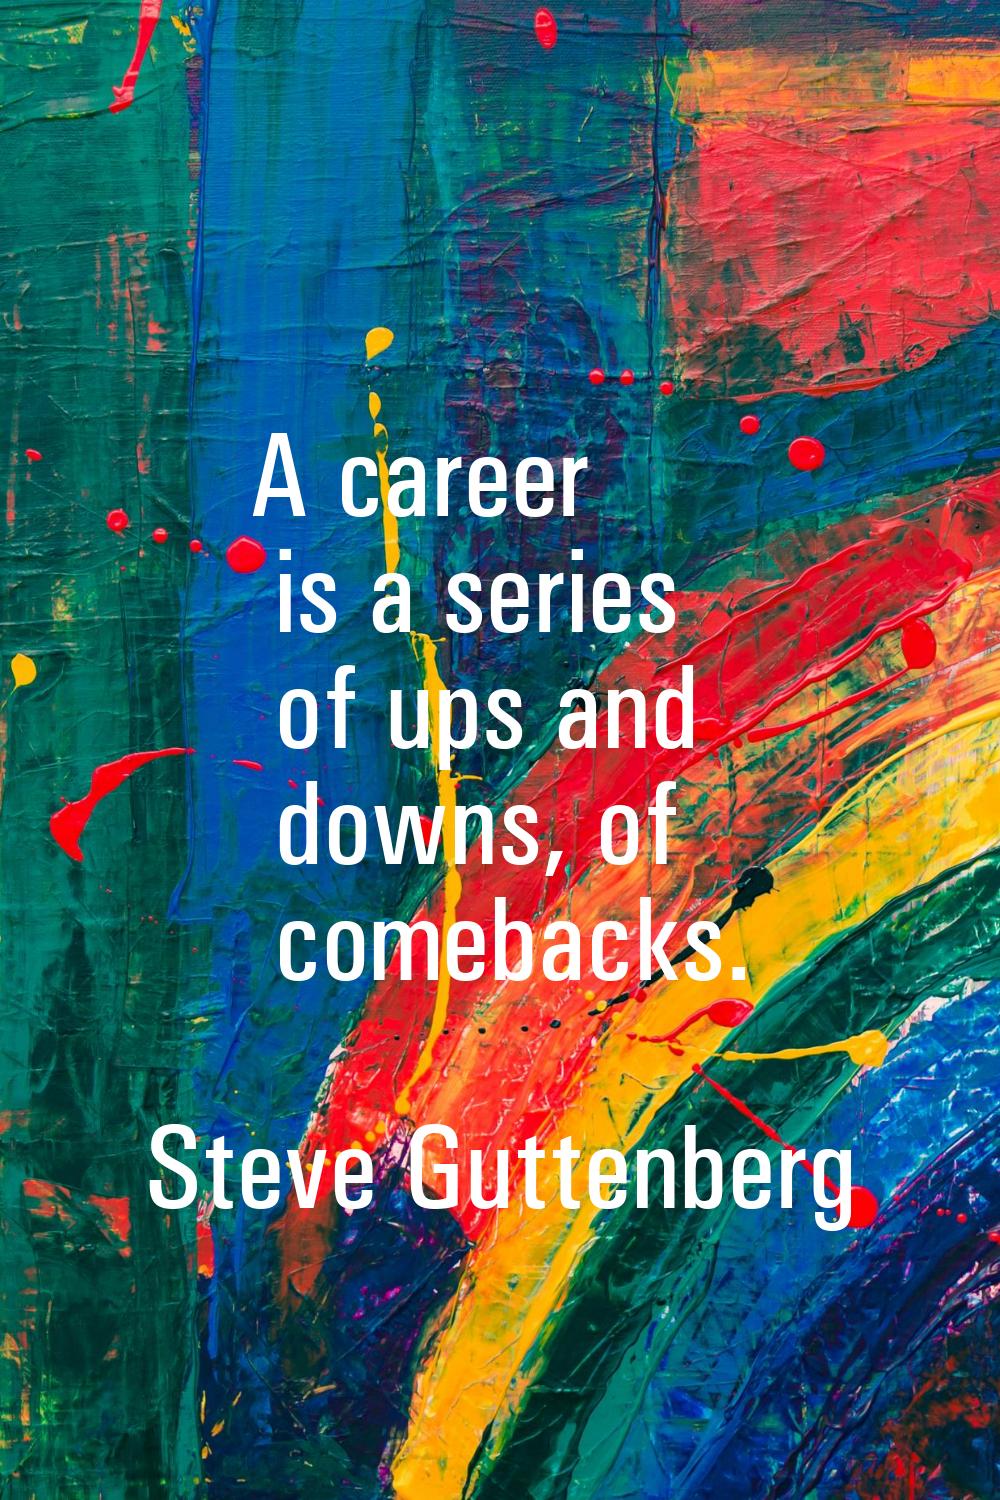 A career is a series of ups and downs, of comebacks.